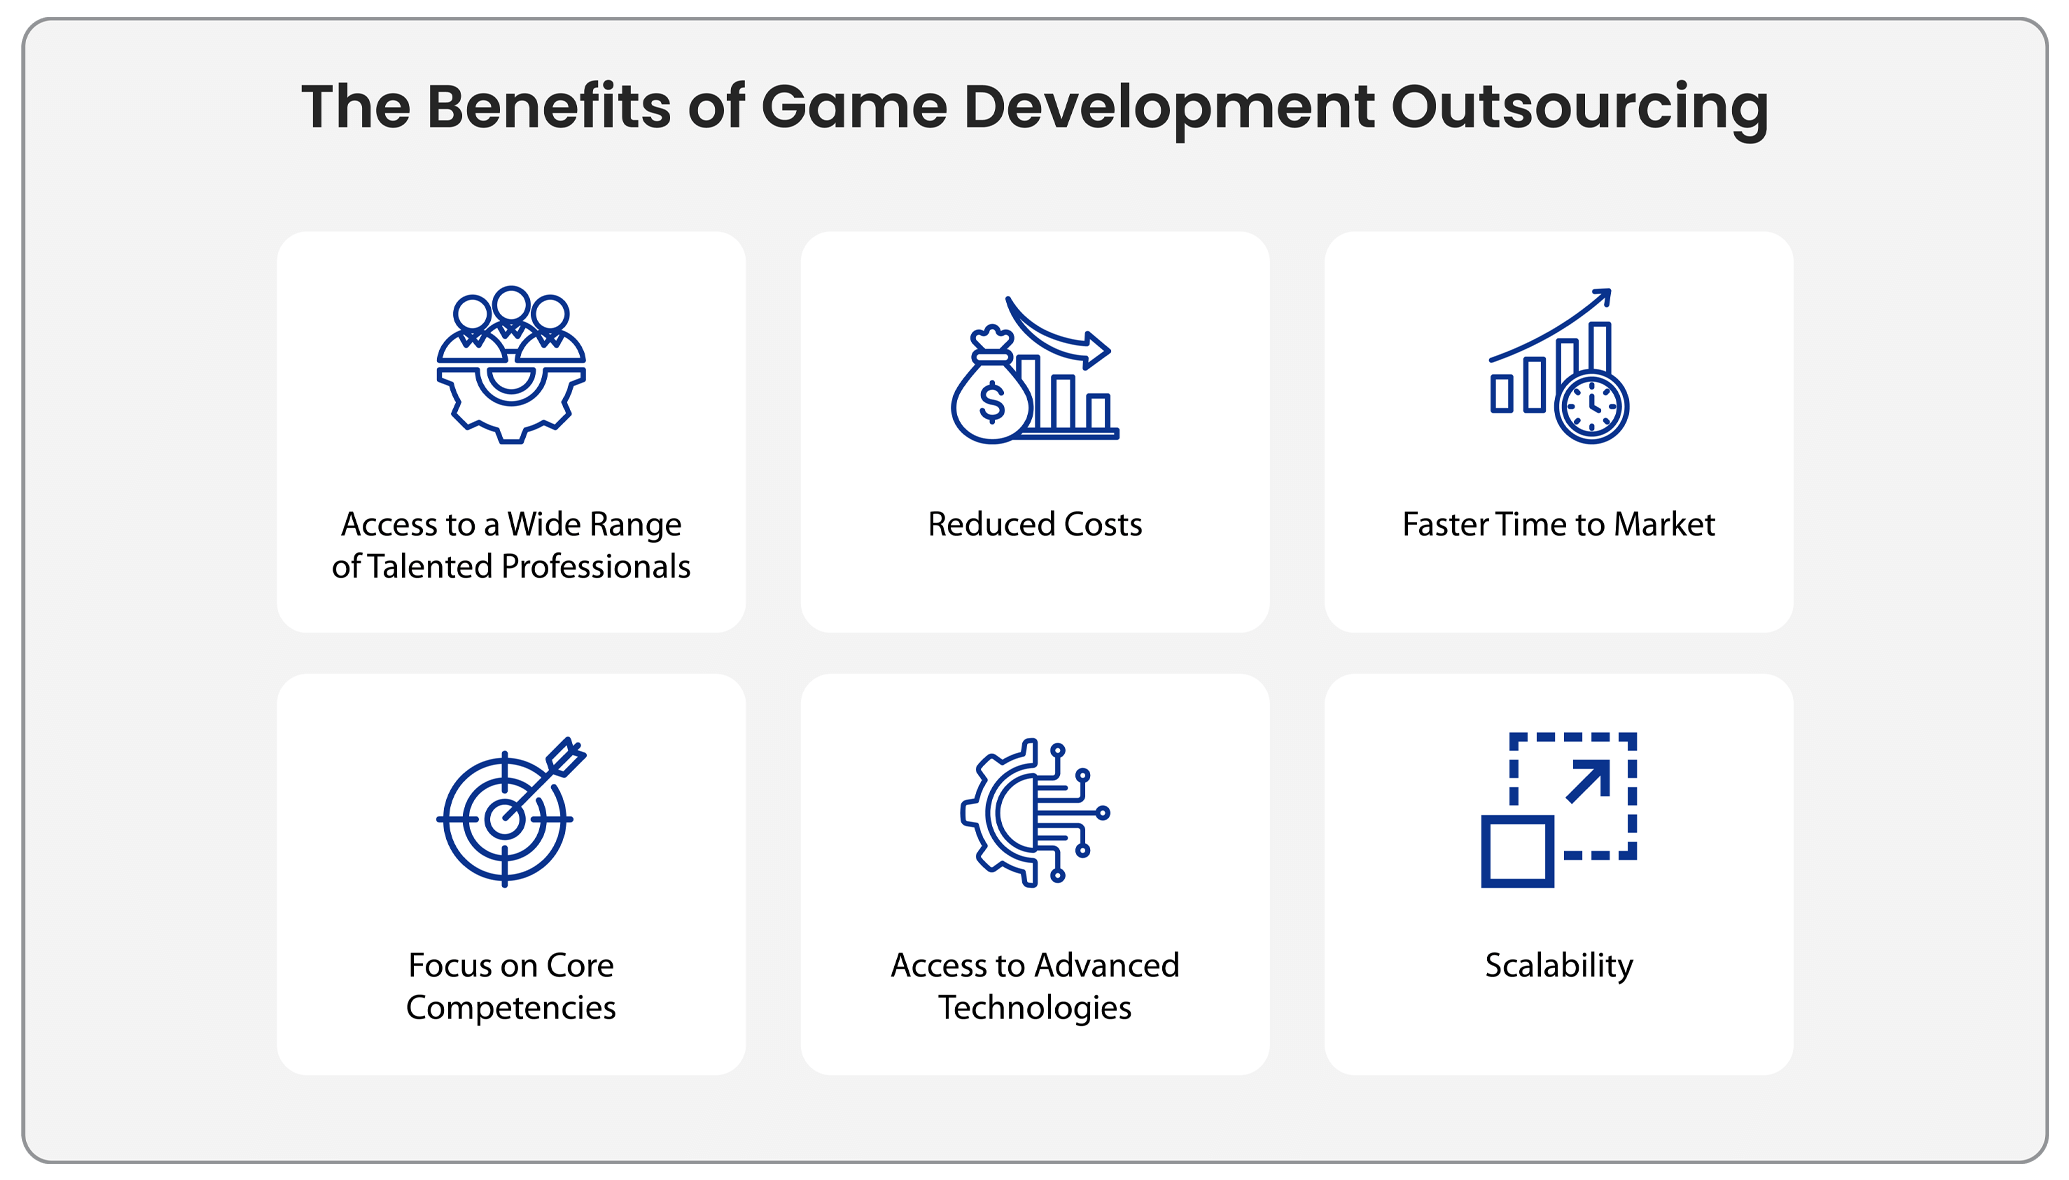 The Benefits of Game Development Outsourcing